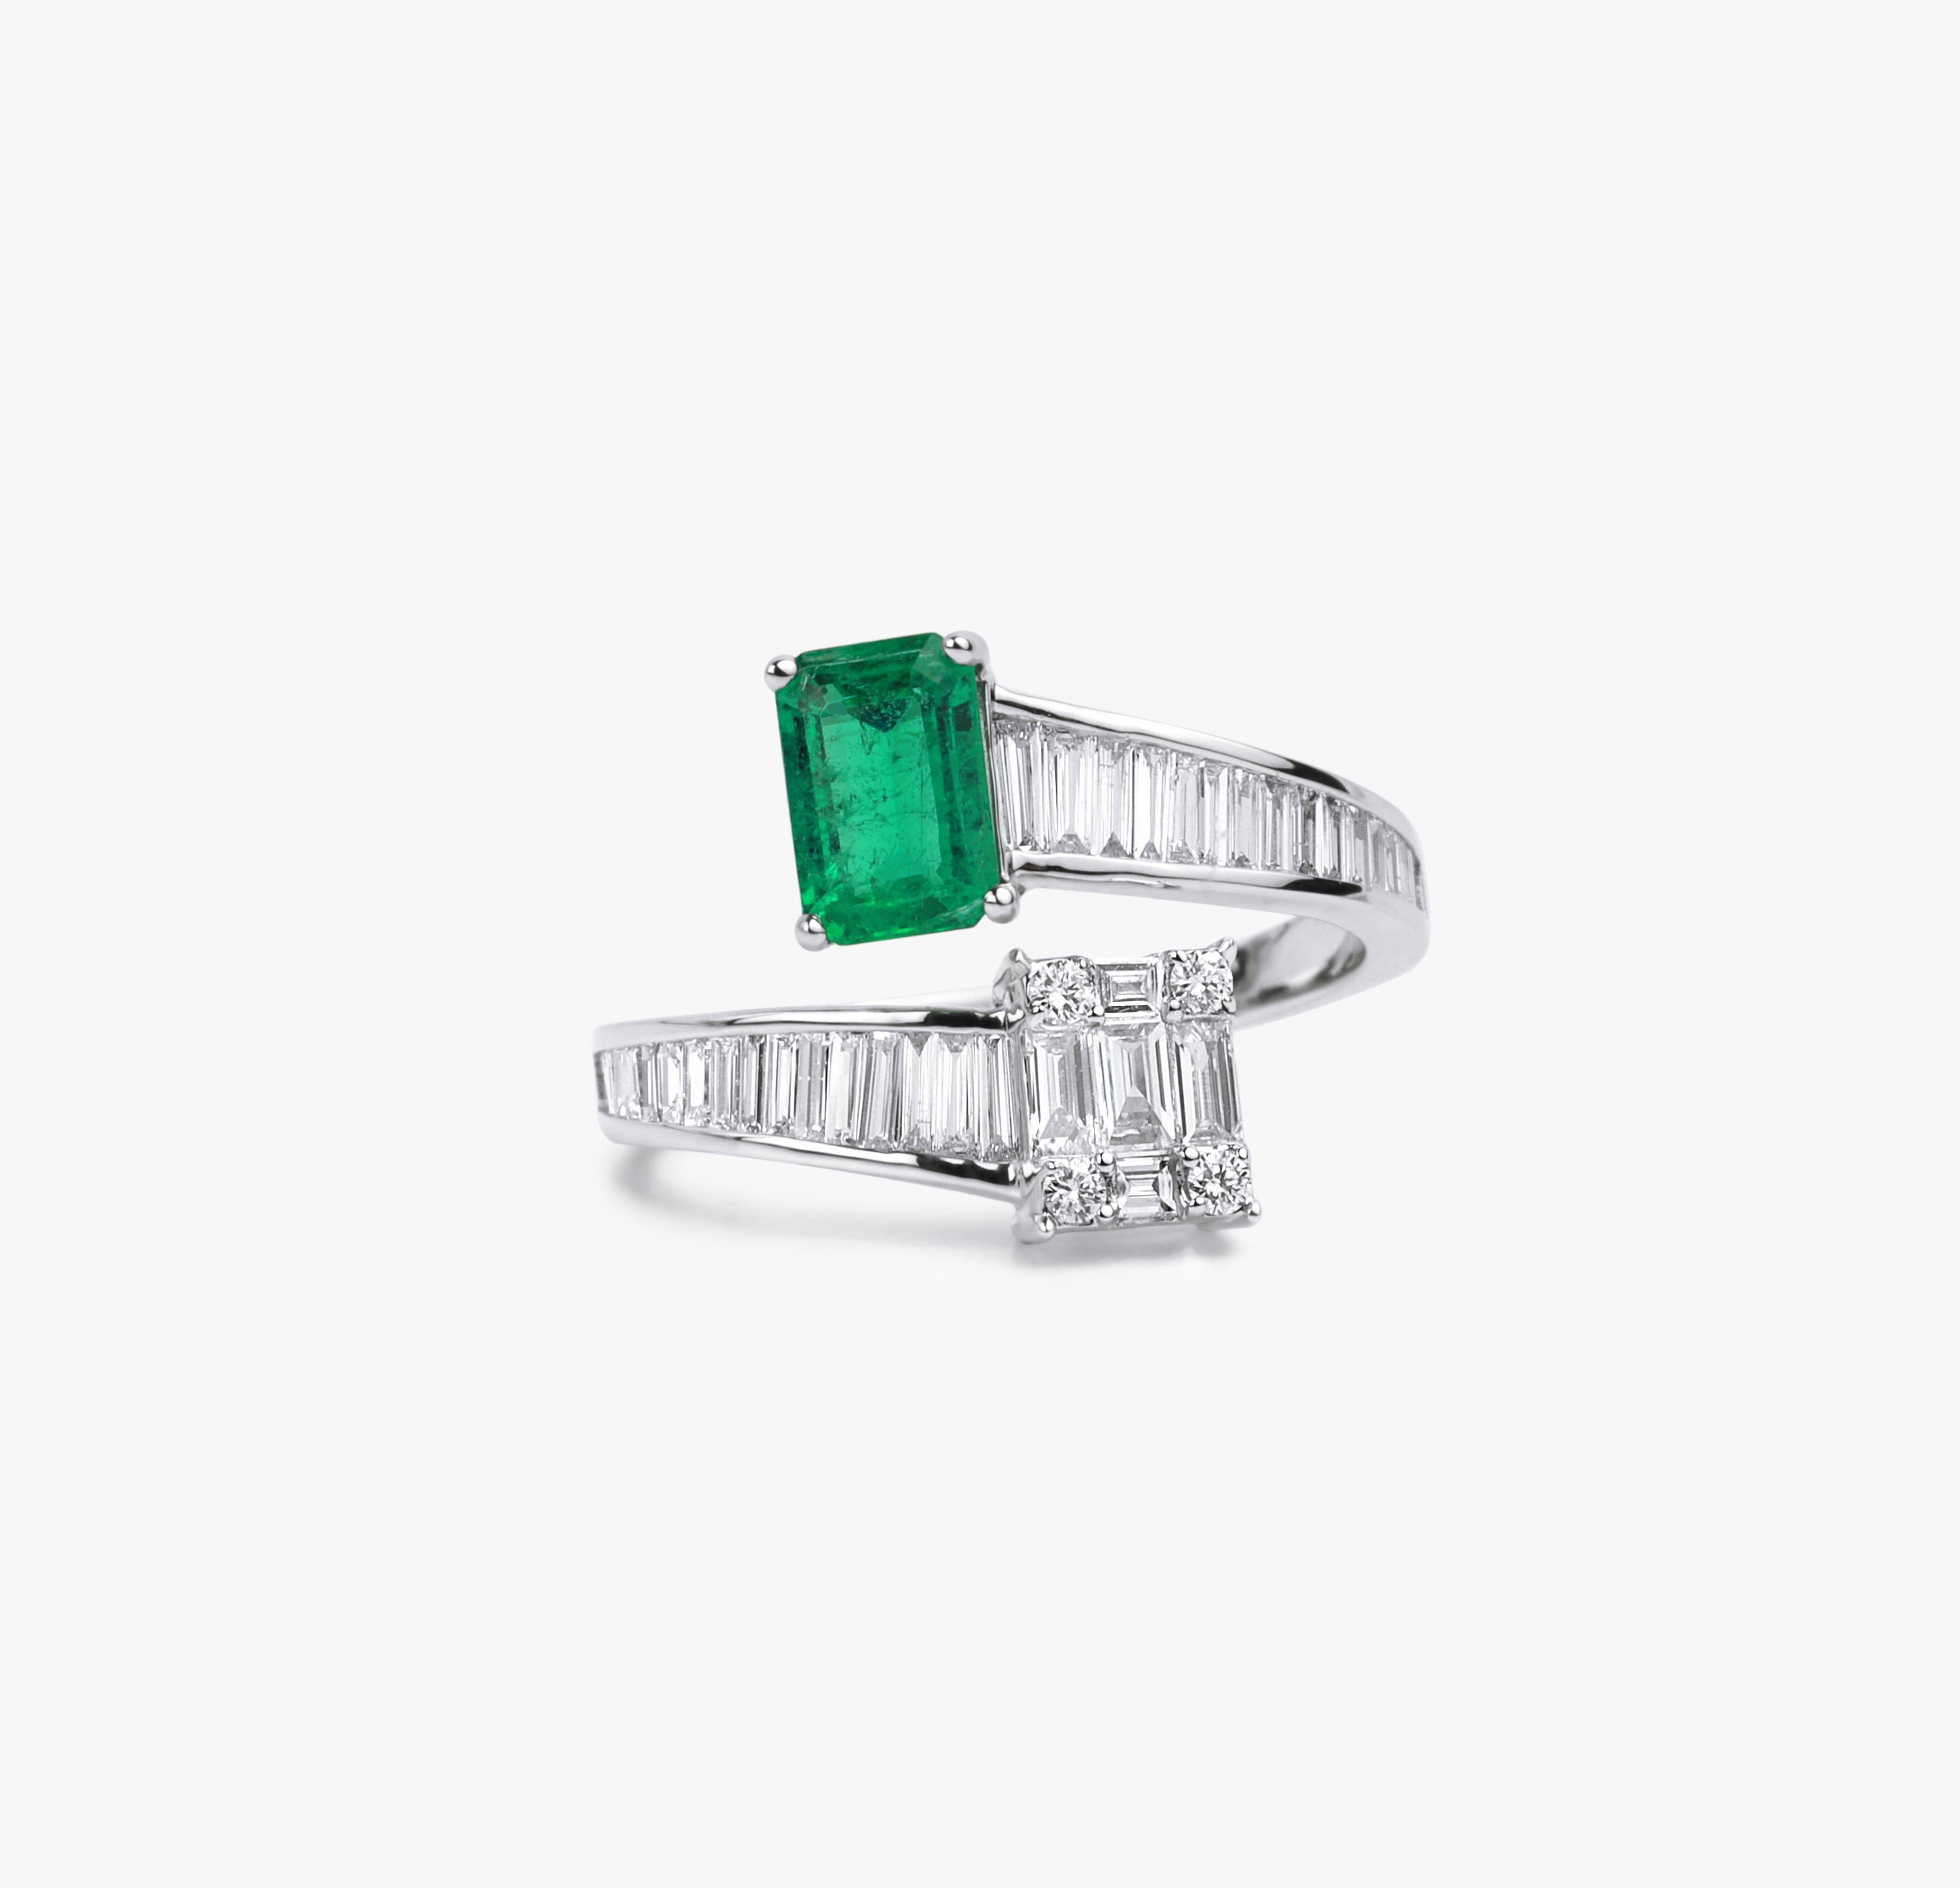 Emerald Cut 2 Carat Emerald Diamond Baguette Cut Cocktail Engagement Ring

Available in 18k white gold.

Same design can be made also with other custom gemstones per request.

Product details:

- Solid gold (18k)

- approx. 0.9 carat CT emerald

-